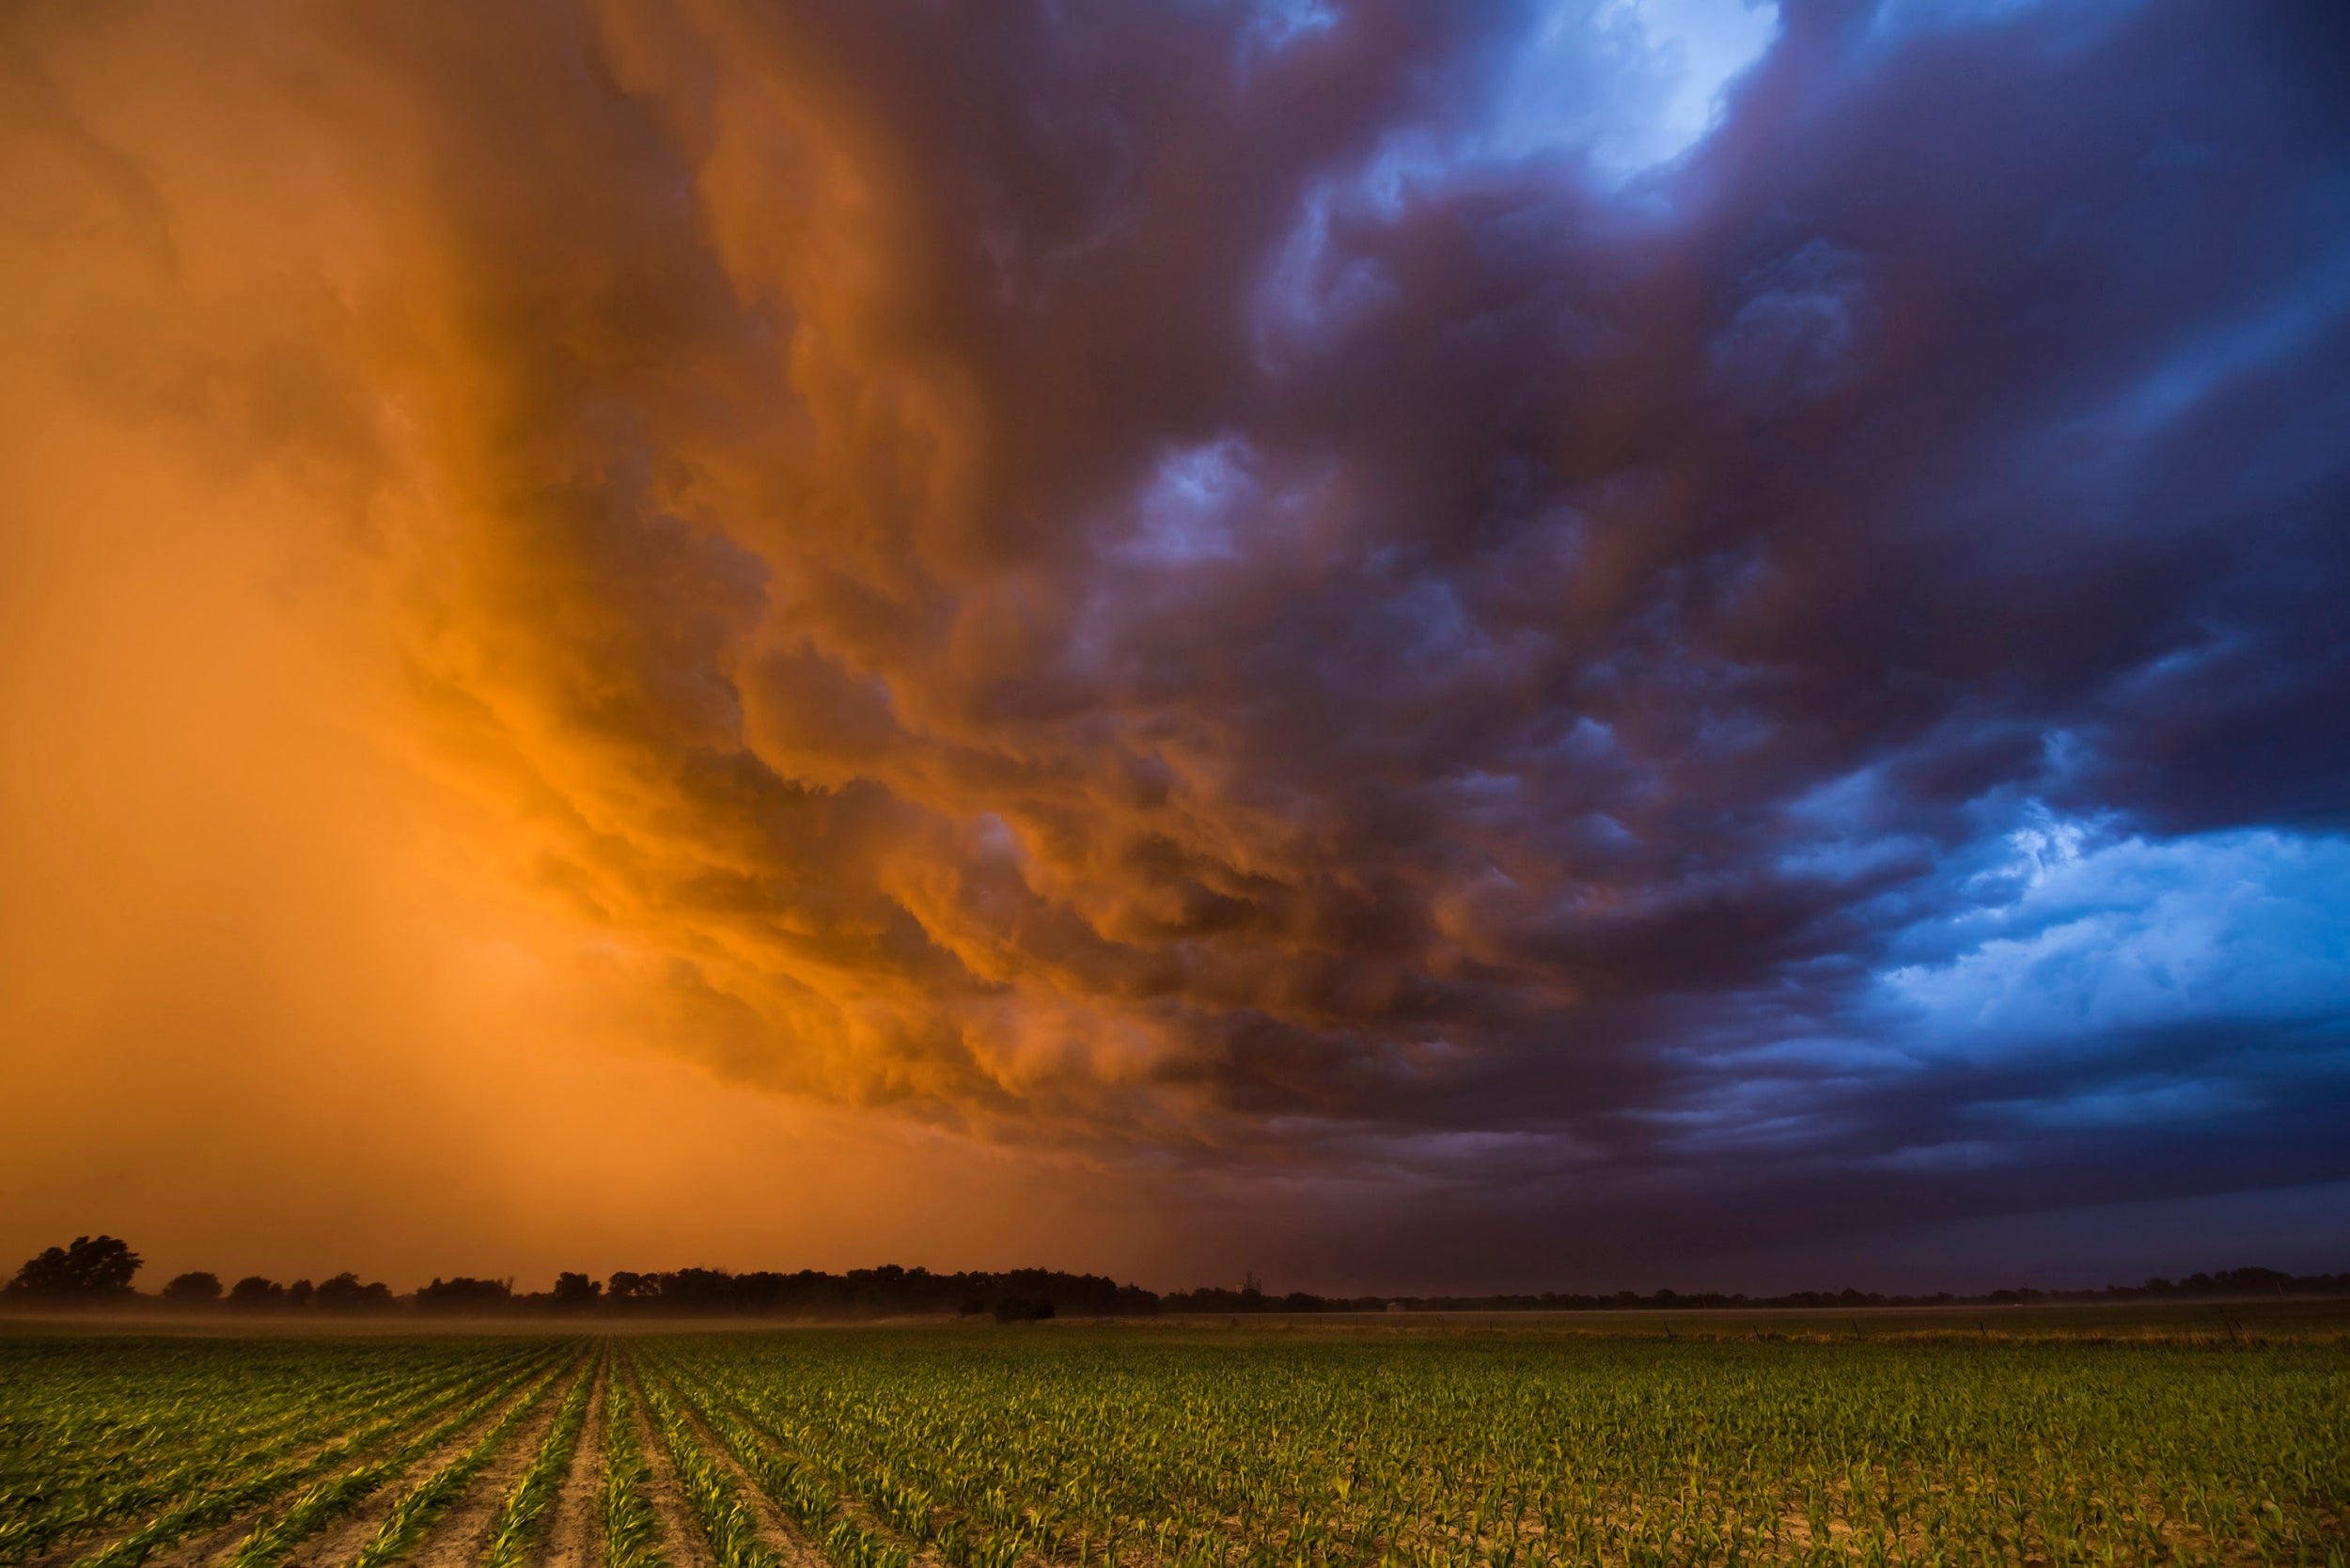 Chasing the storm: Amazing photos capture the character of America's most elemental weather